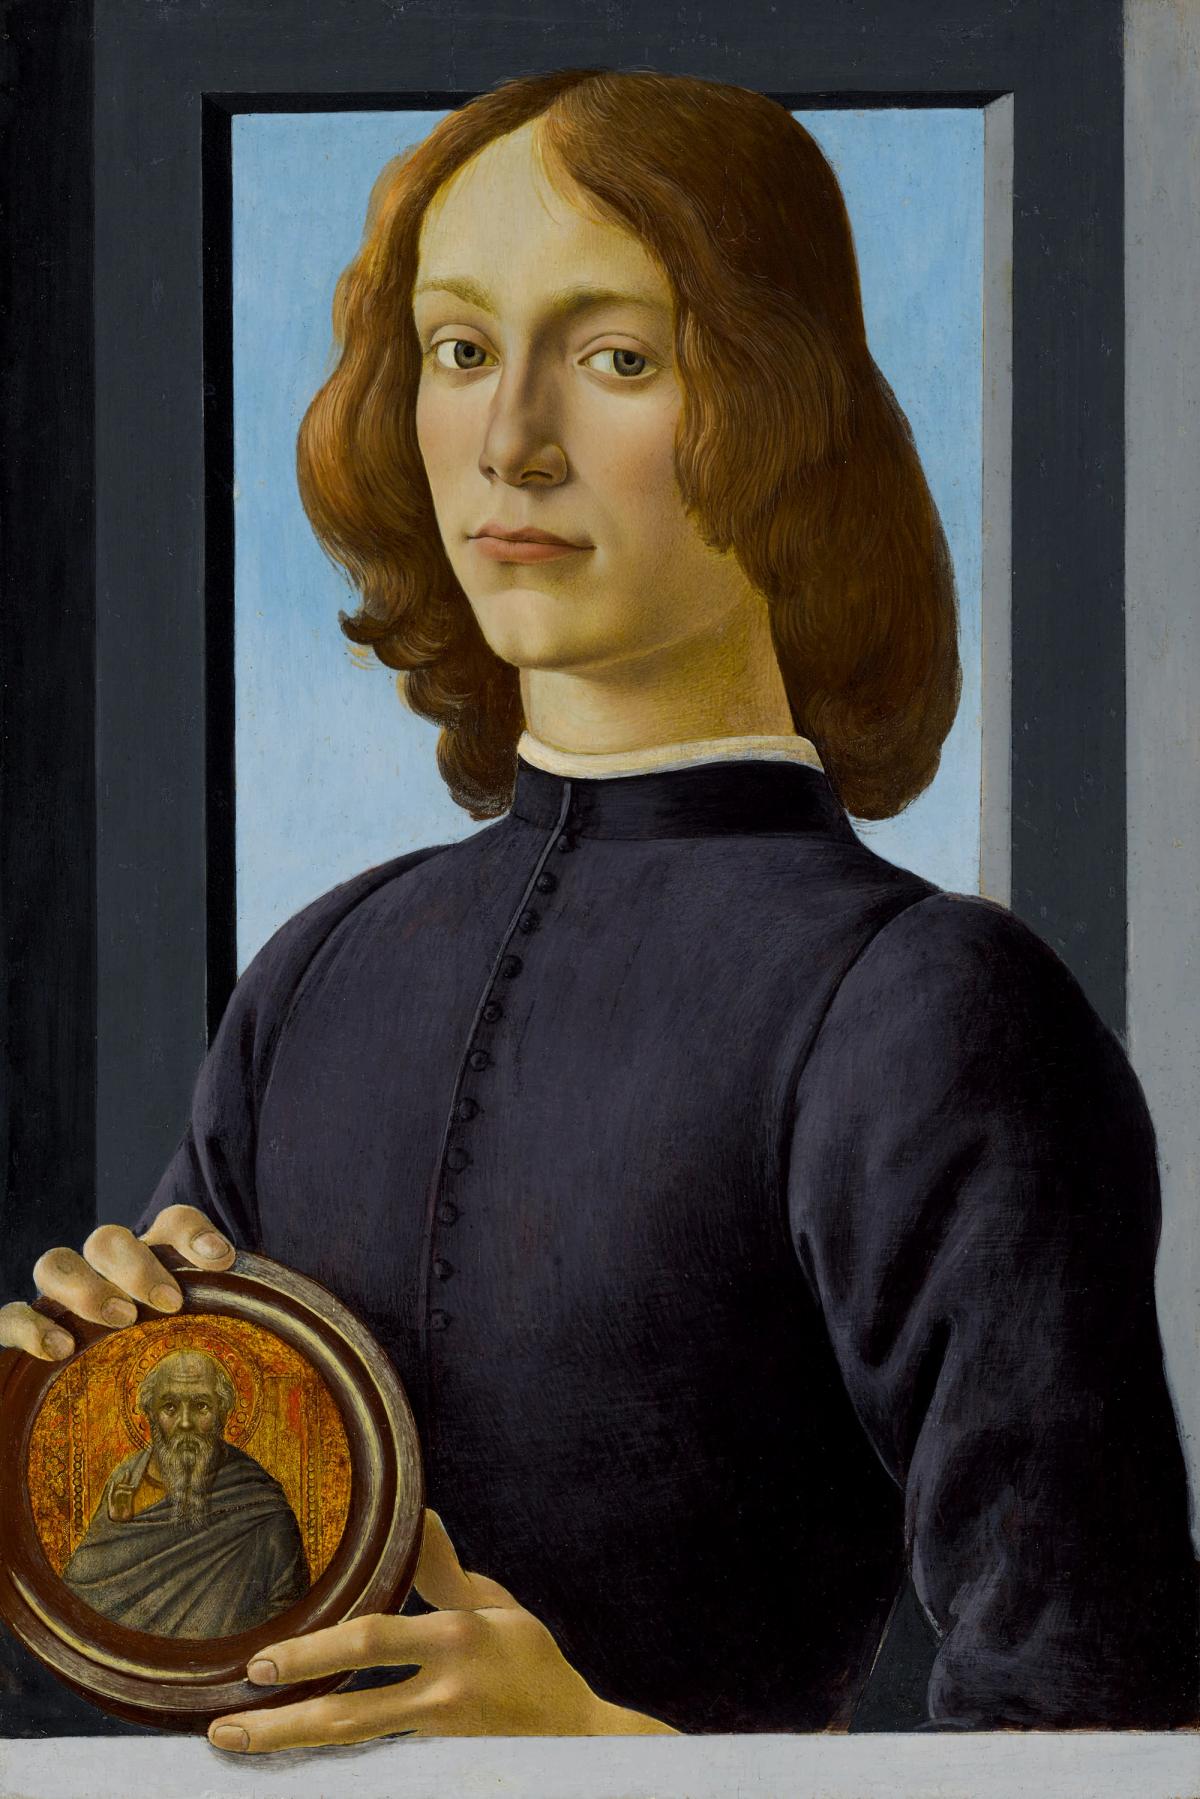 Sandro Botticelli’s Young Man Holding a Roundel will be offered for $80m in January as the highlight of Sotheby's Masters Week series of sales in New York. Courtesy of Sotheby's